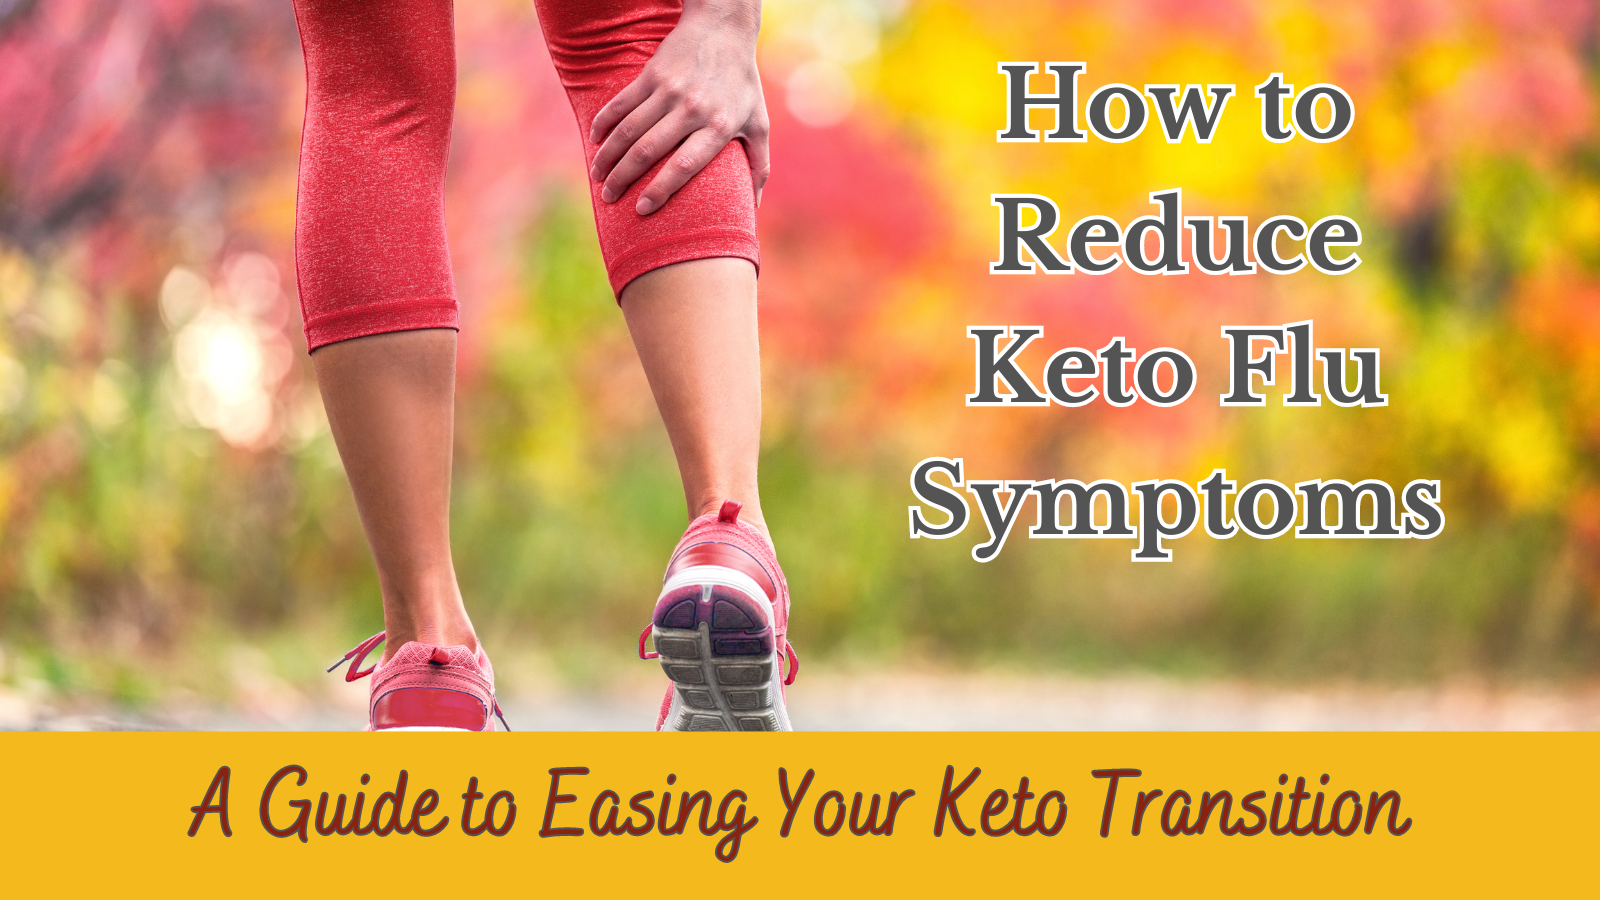 How to Reduce Keto Flu Symptoms: A Guide to Easing Your Keto Transition